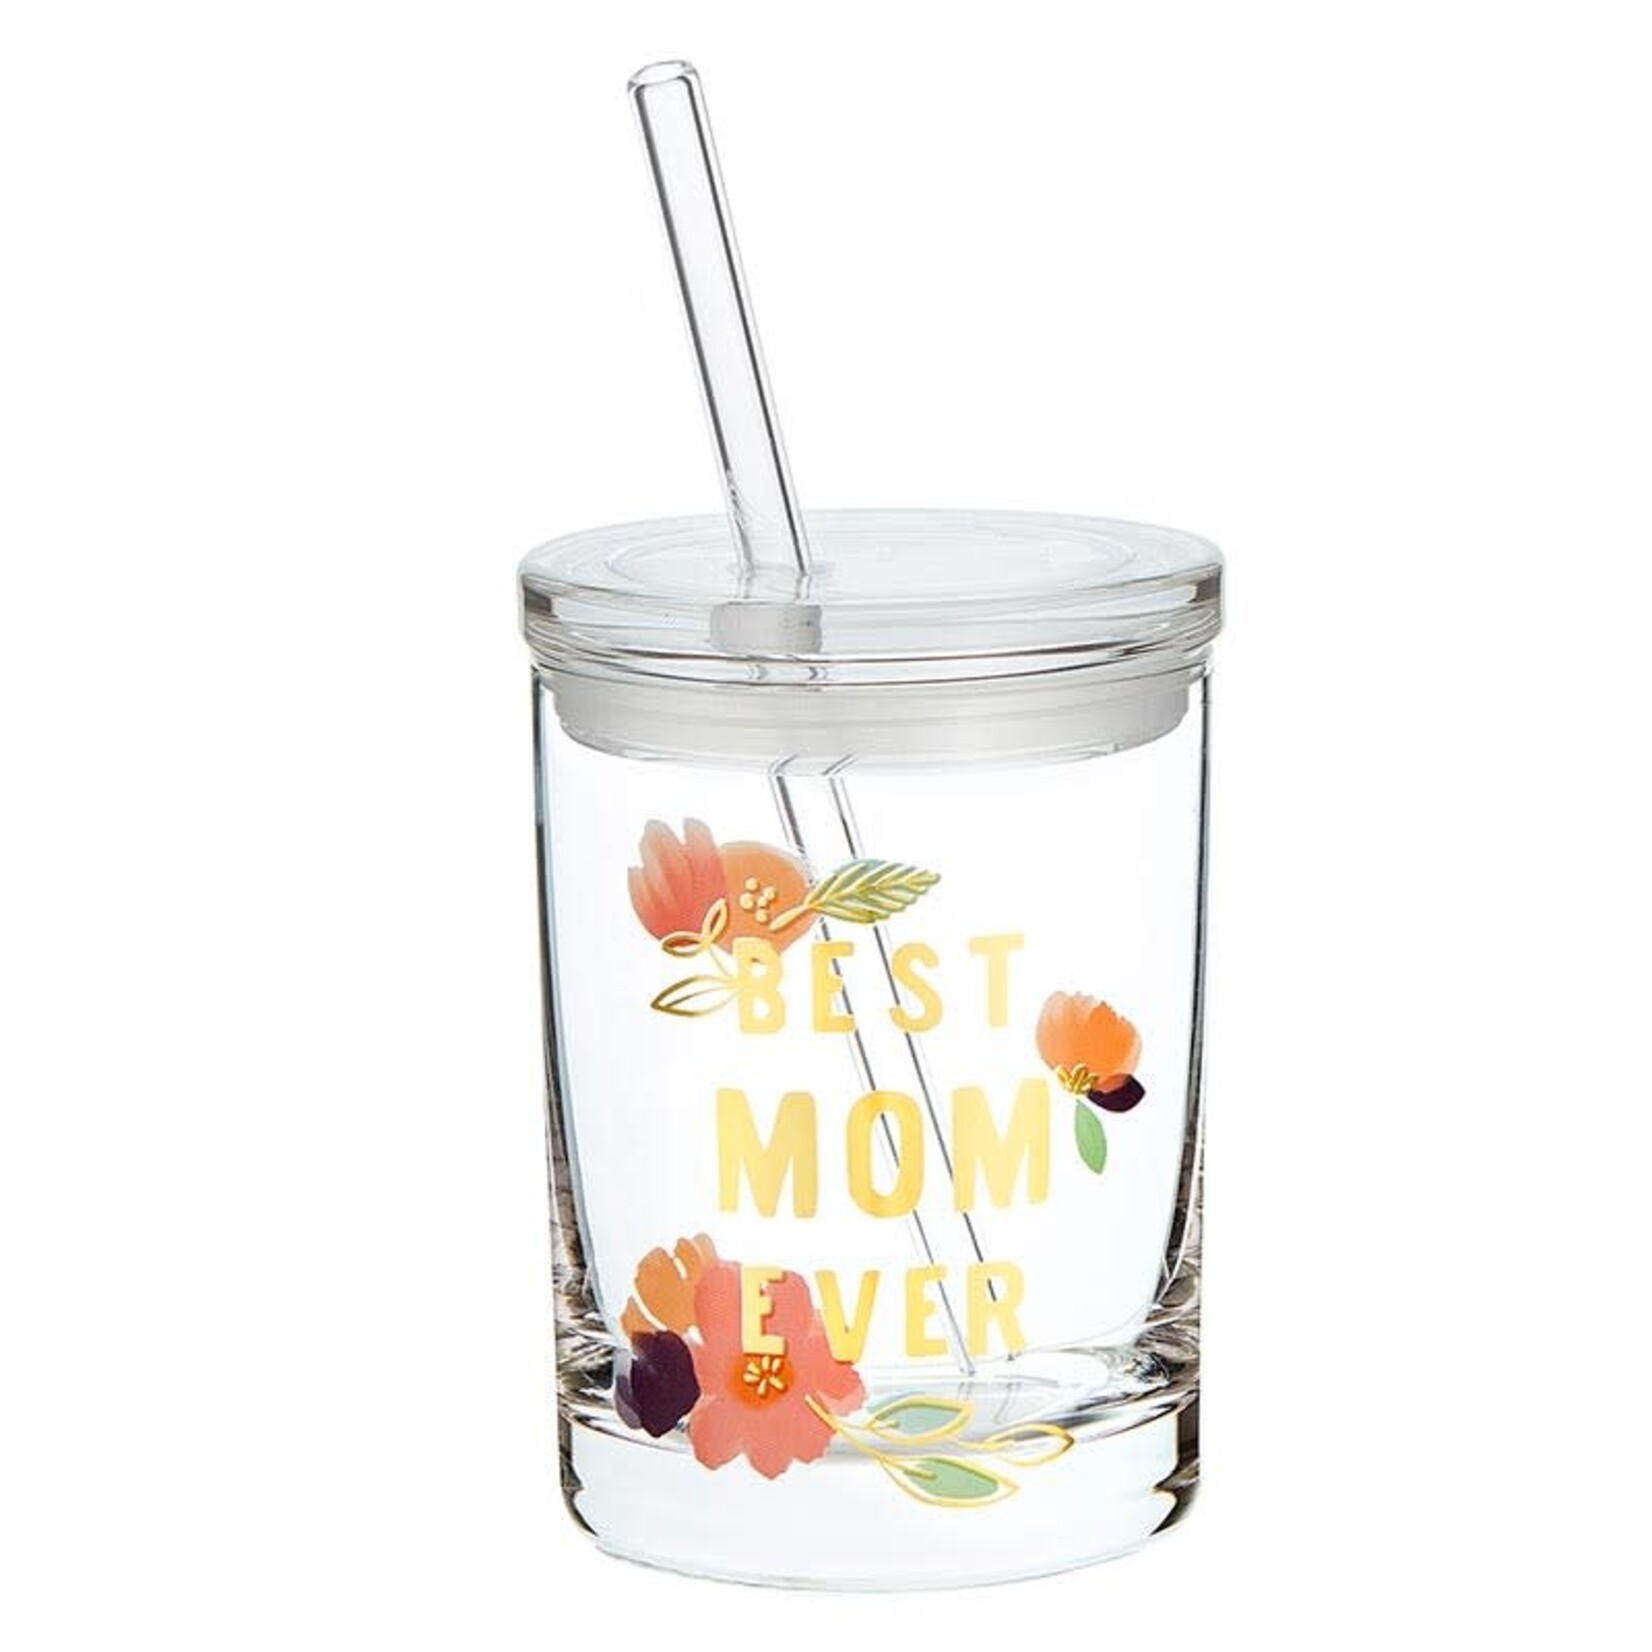 Best Mom Ever Glass Jar with Lid